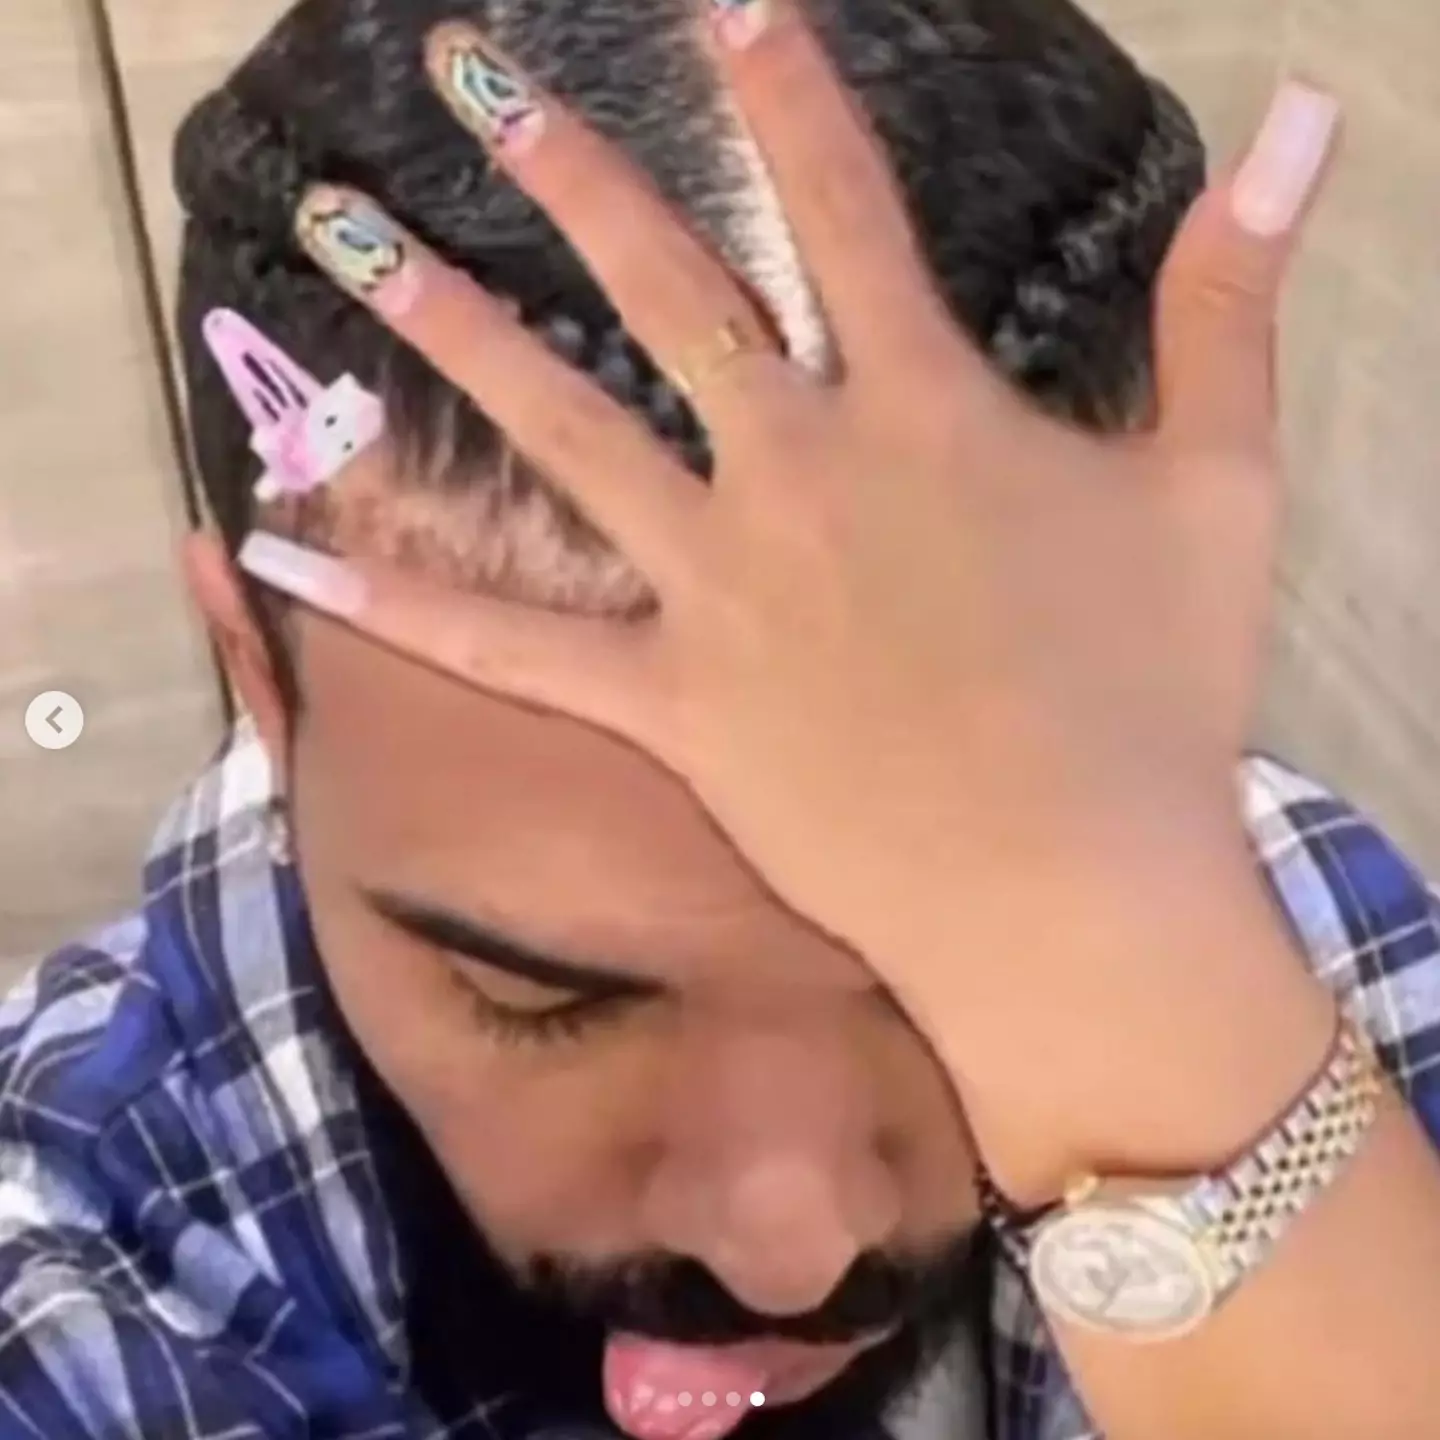 The rapper took to the photo-sharing site to share a selfie with what appears to be a woman’s hand on his head.